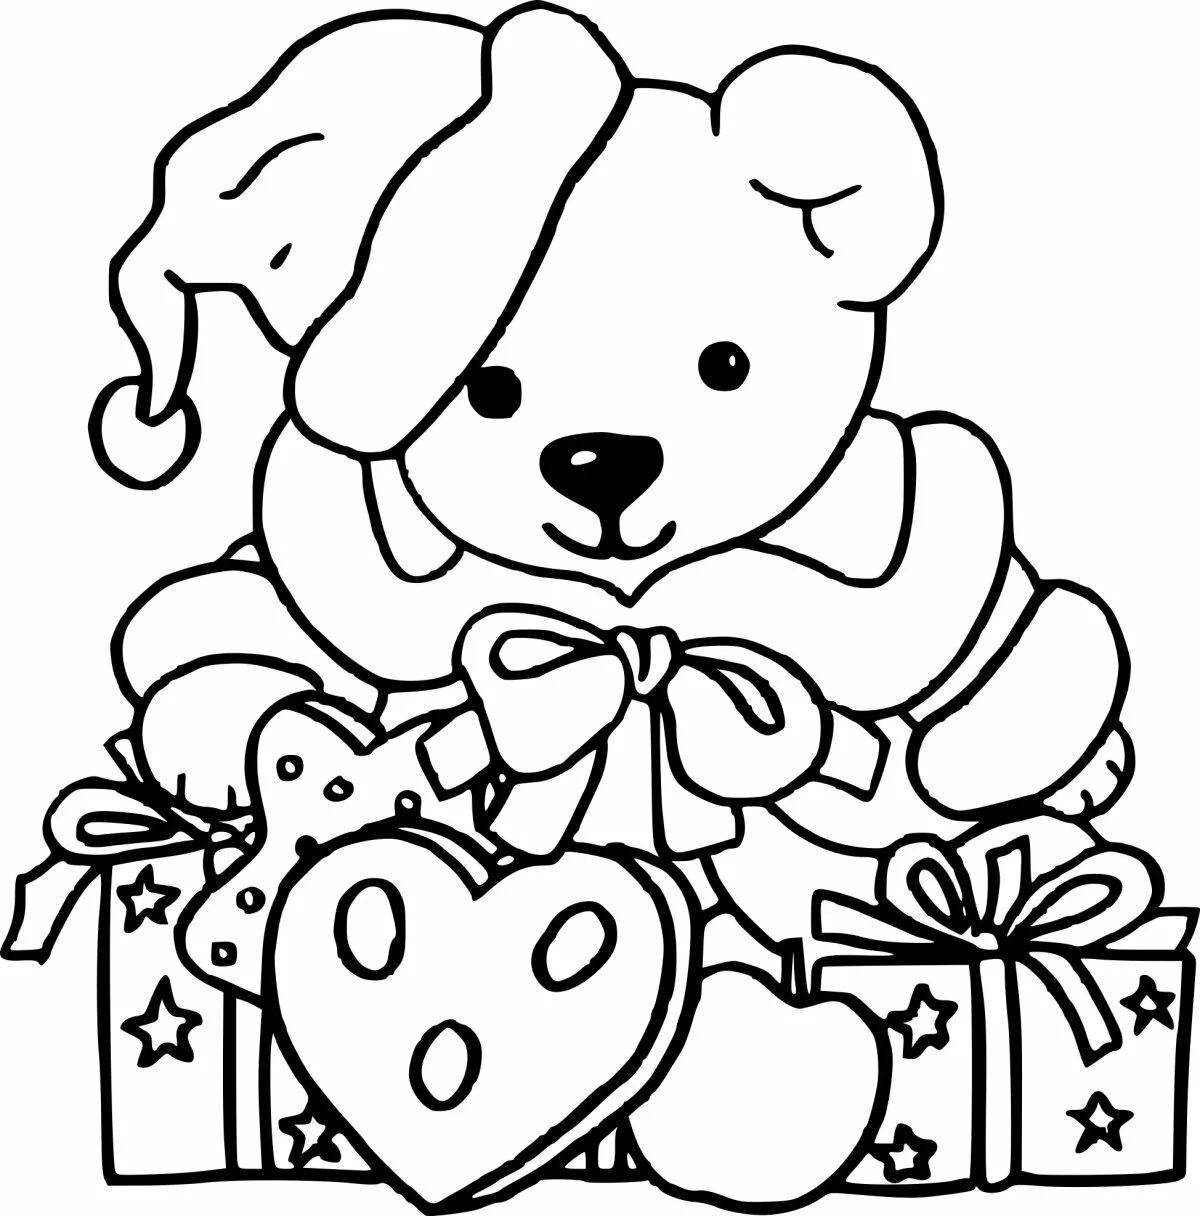 Bright bear with a gift coloring book